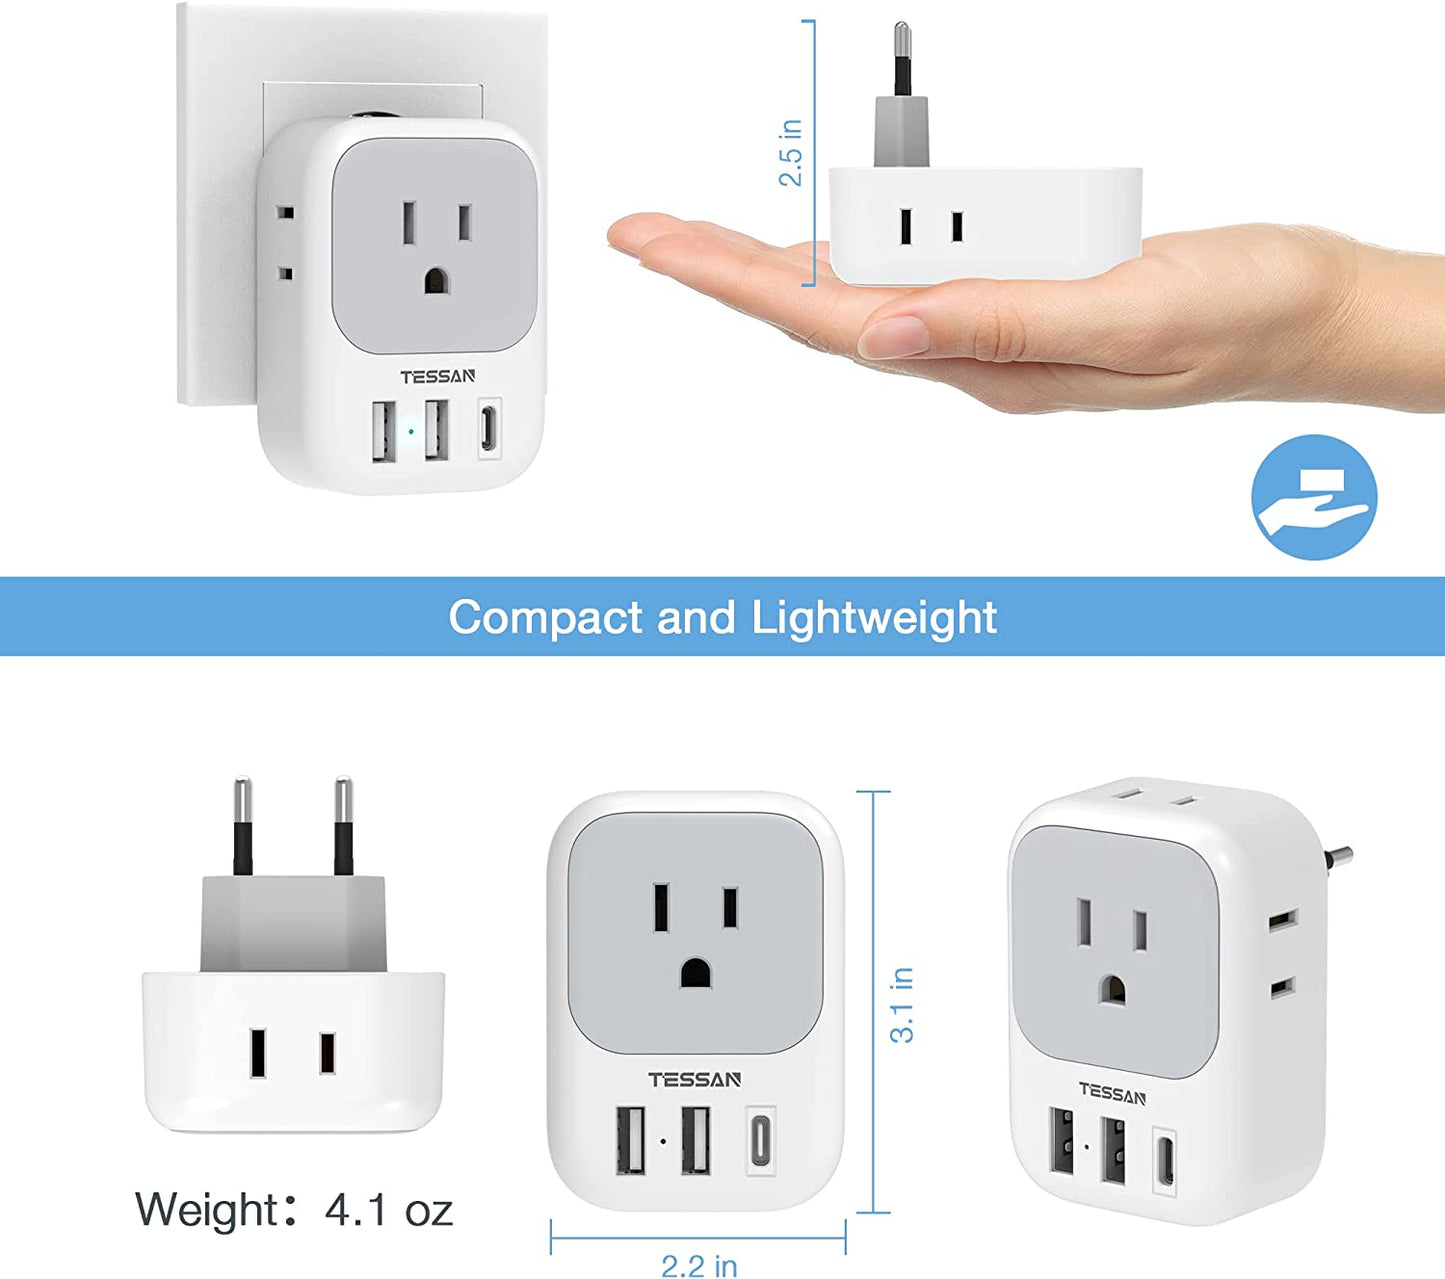 European Travel Plug Adapter Plug Charger with 4 Outlets 3 USB